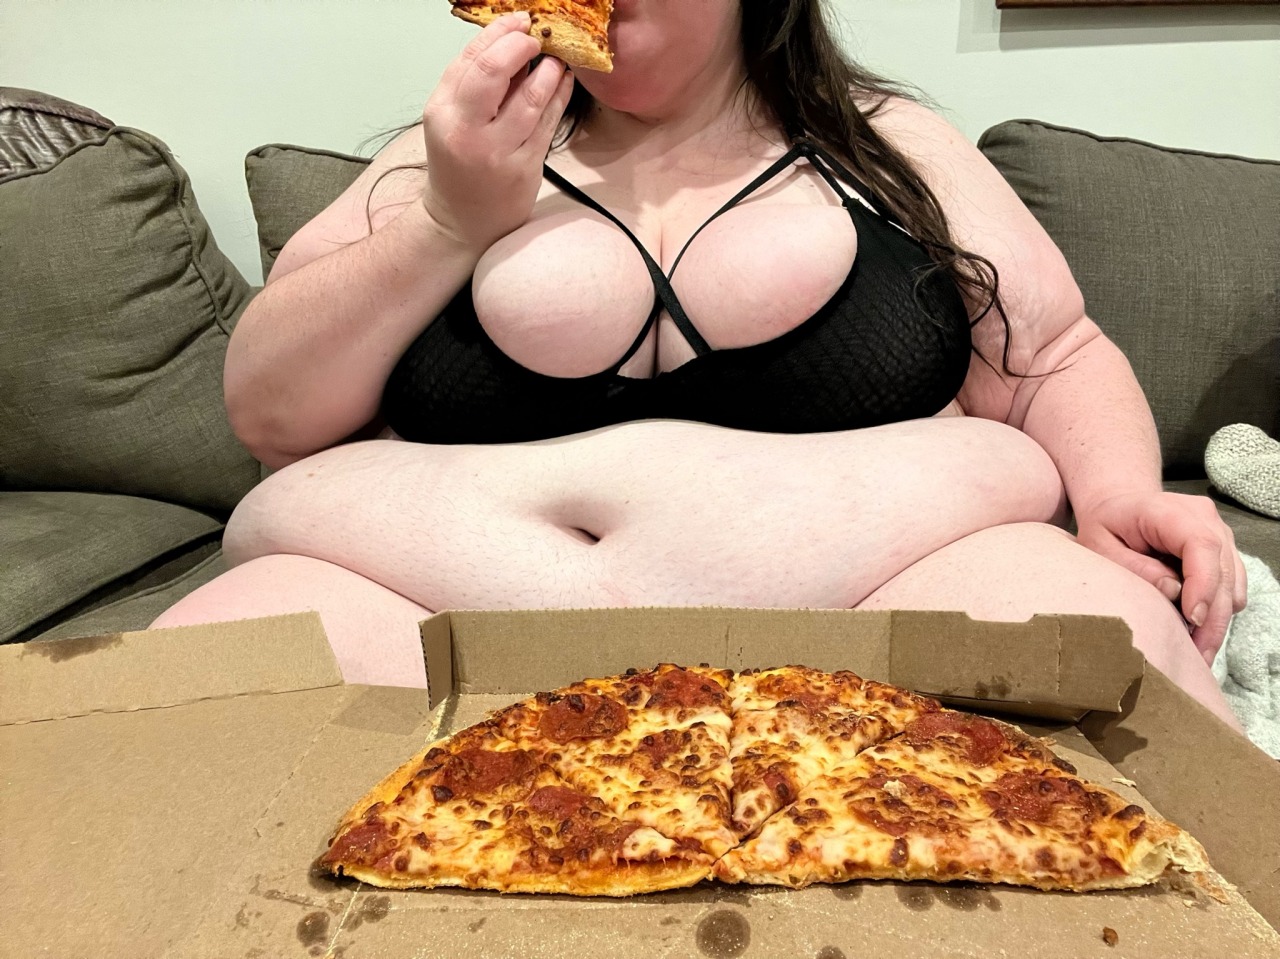 Sex wontstopeating-deactivated20220:Pizza pig pictures